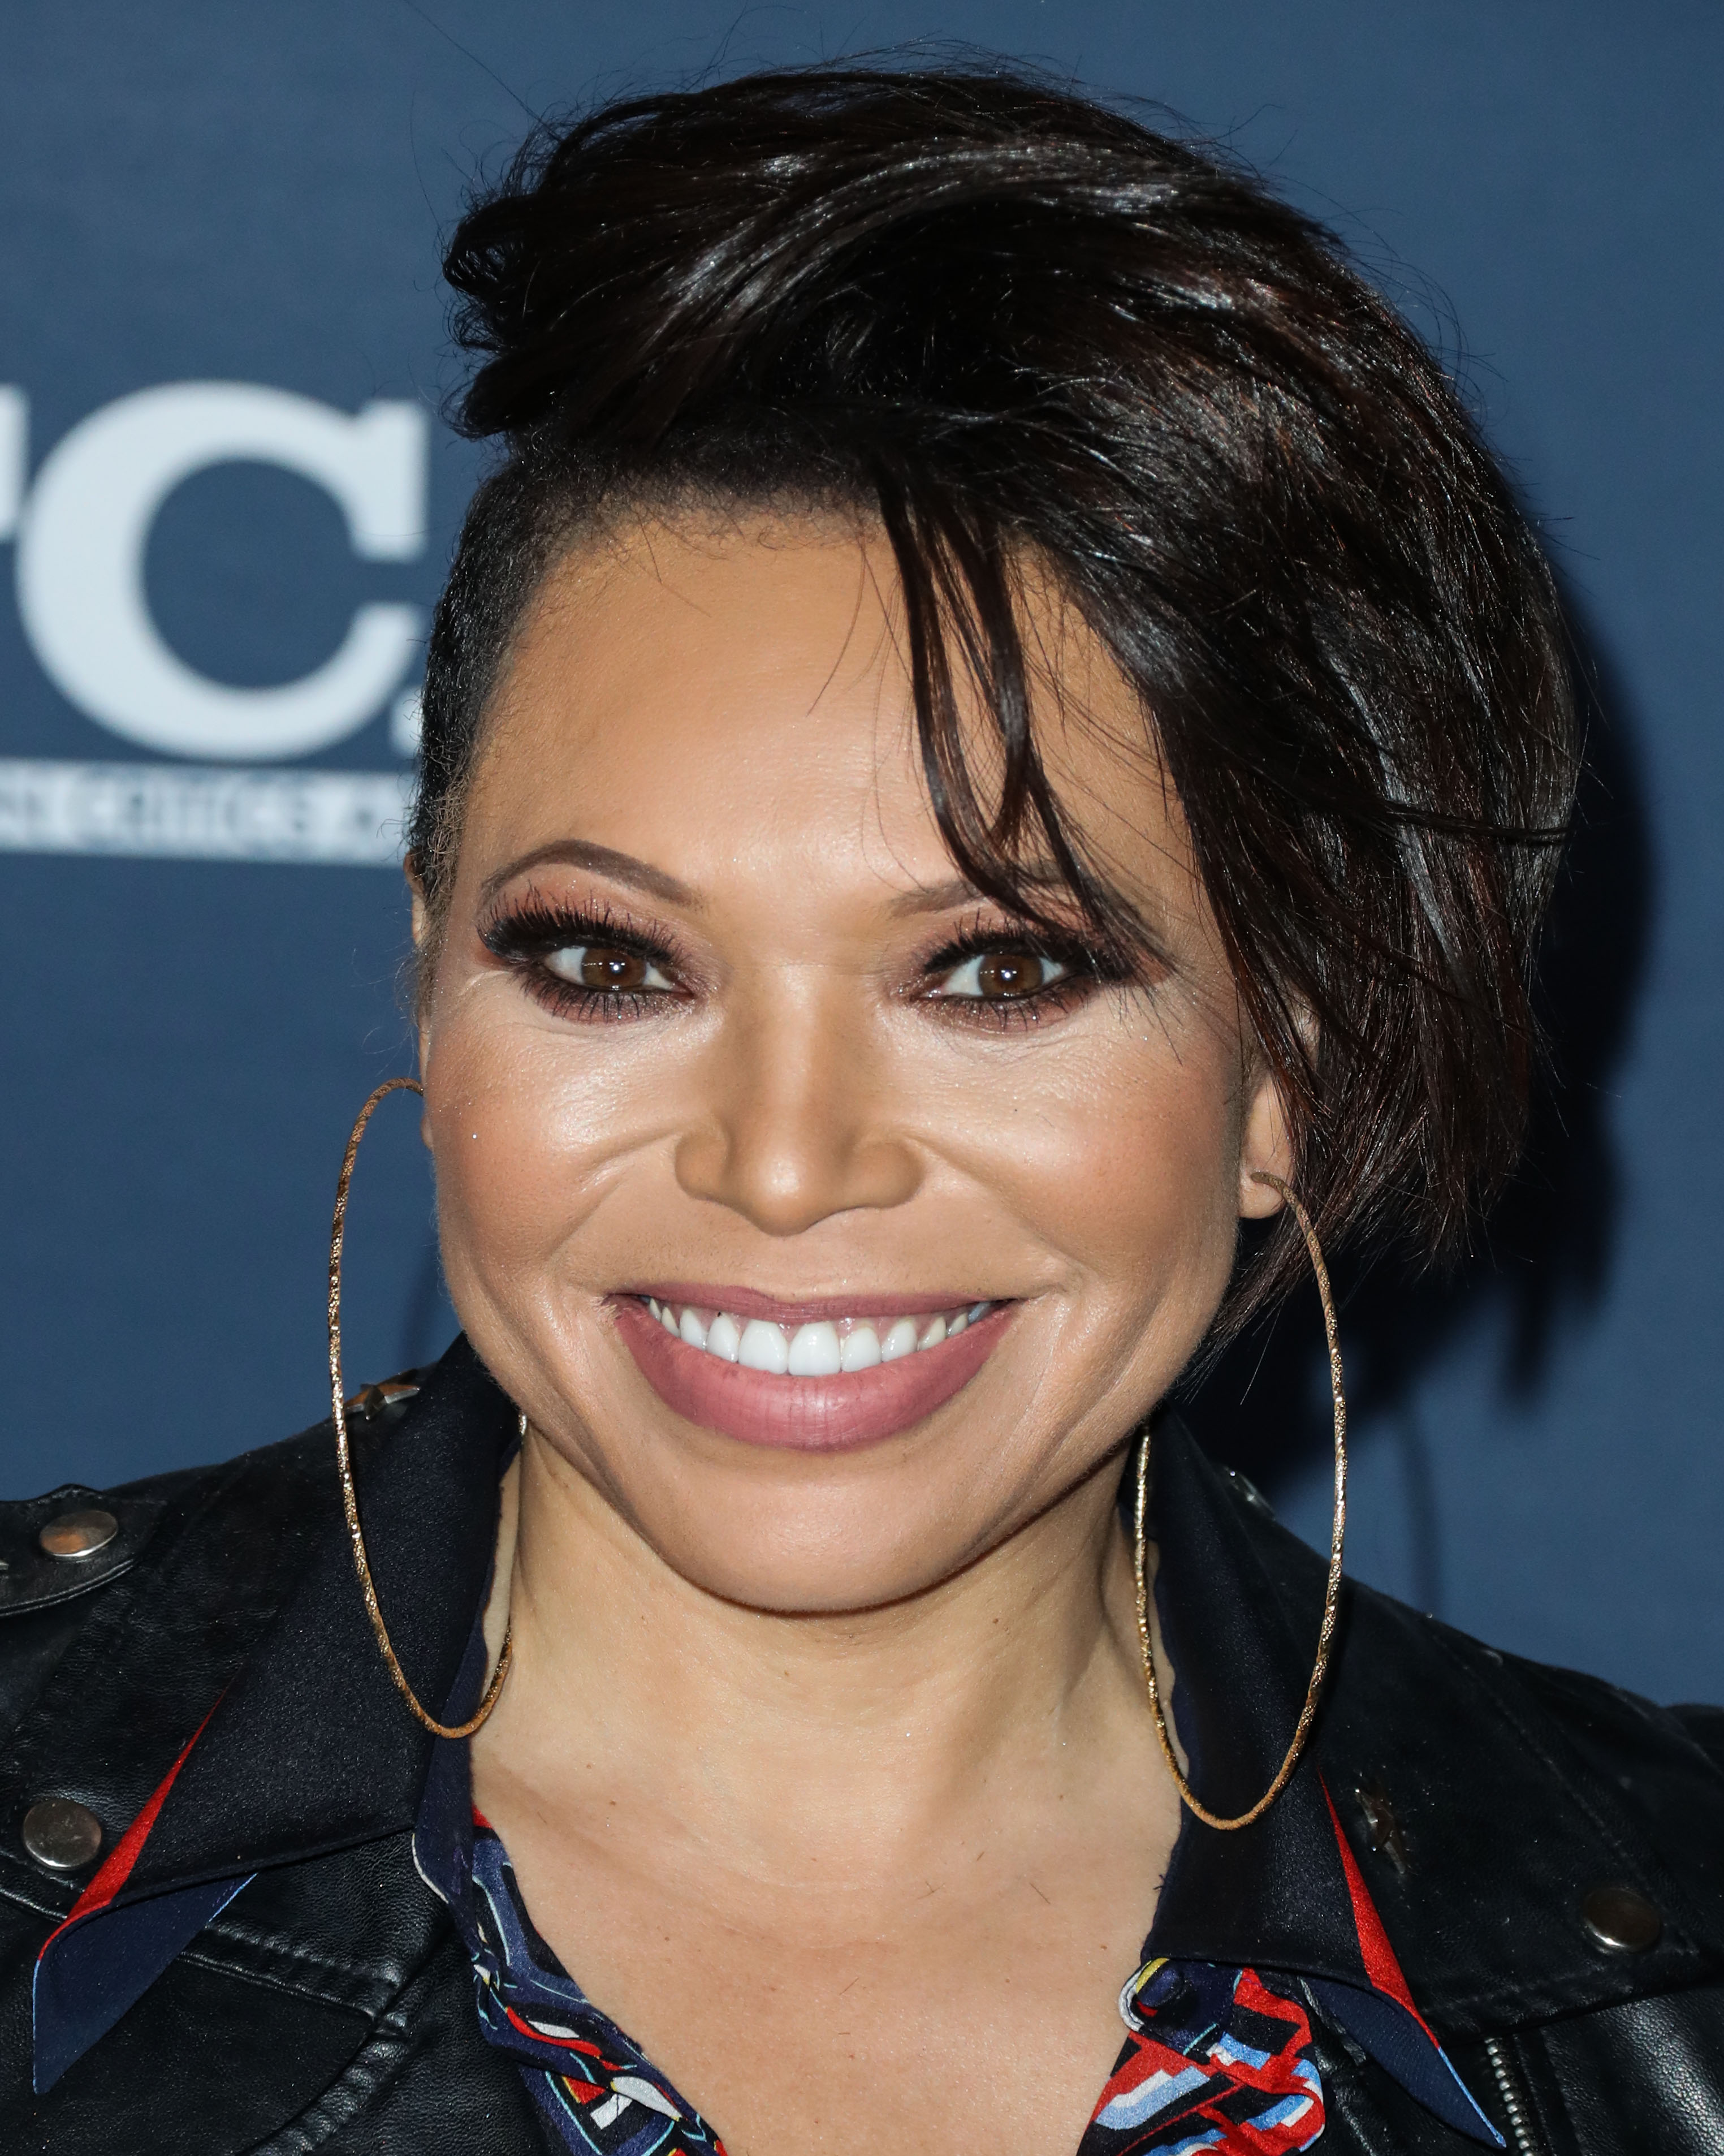 Tisha Campbell arrives at the FOX Winter TCA 2020 All-Star Party held at The Langham Huntington Hotel on January 7, 2020 in Pasadena, Los Angeles, California, United States.